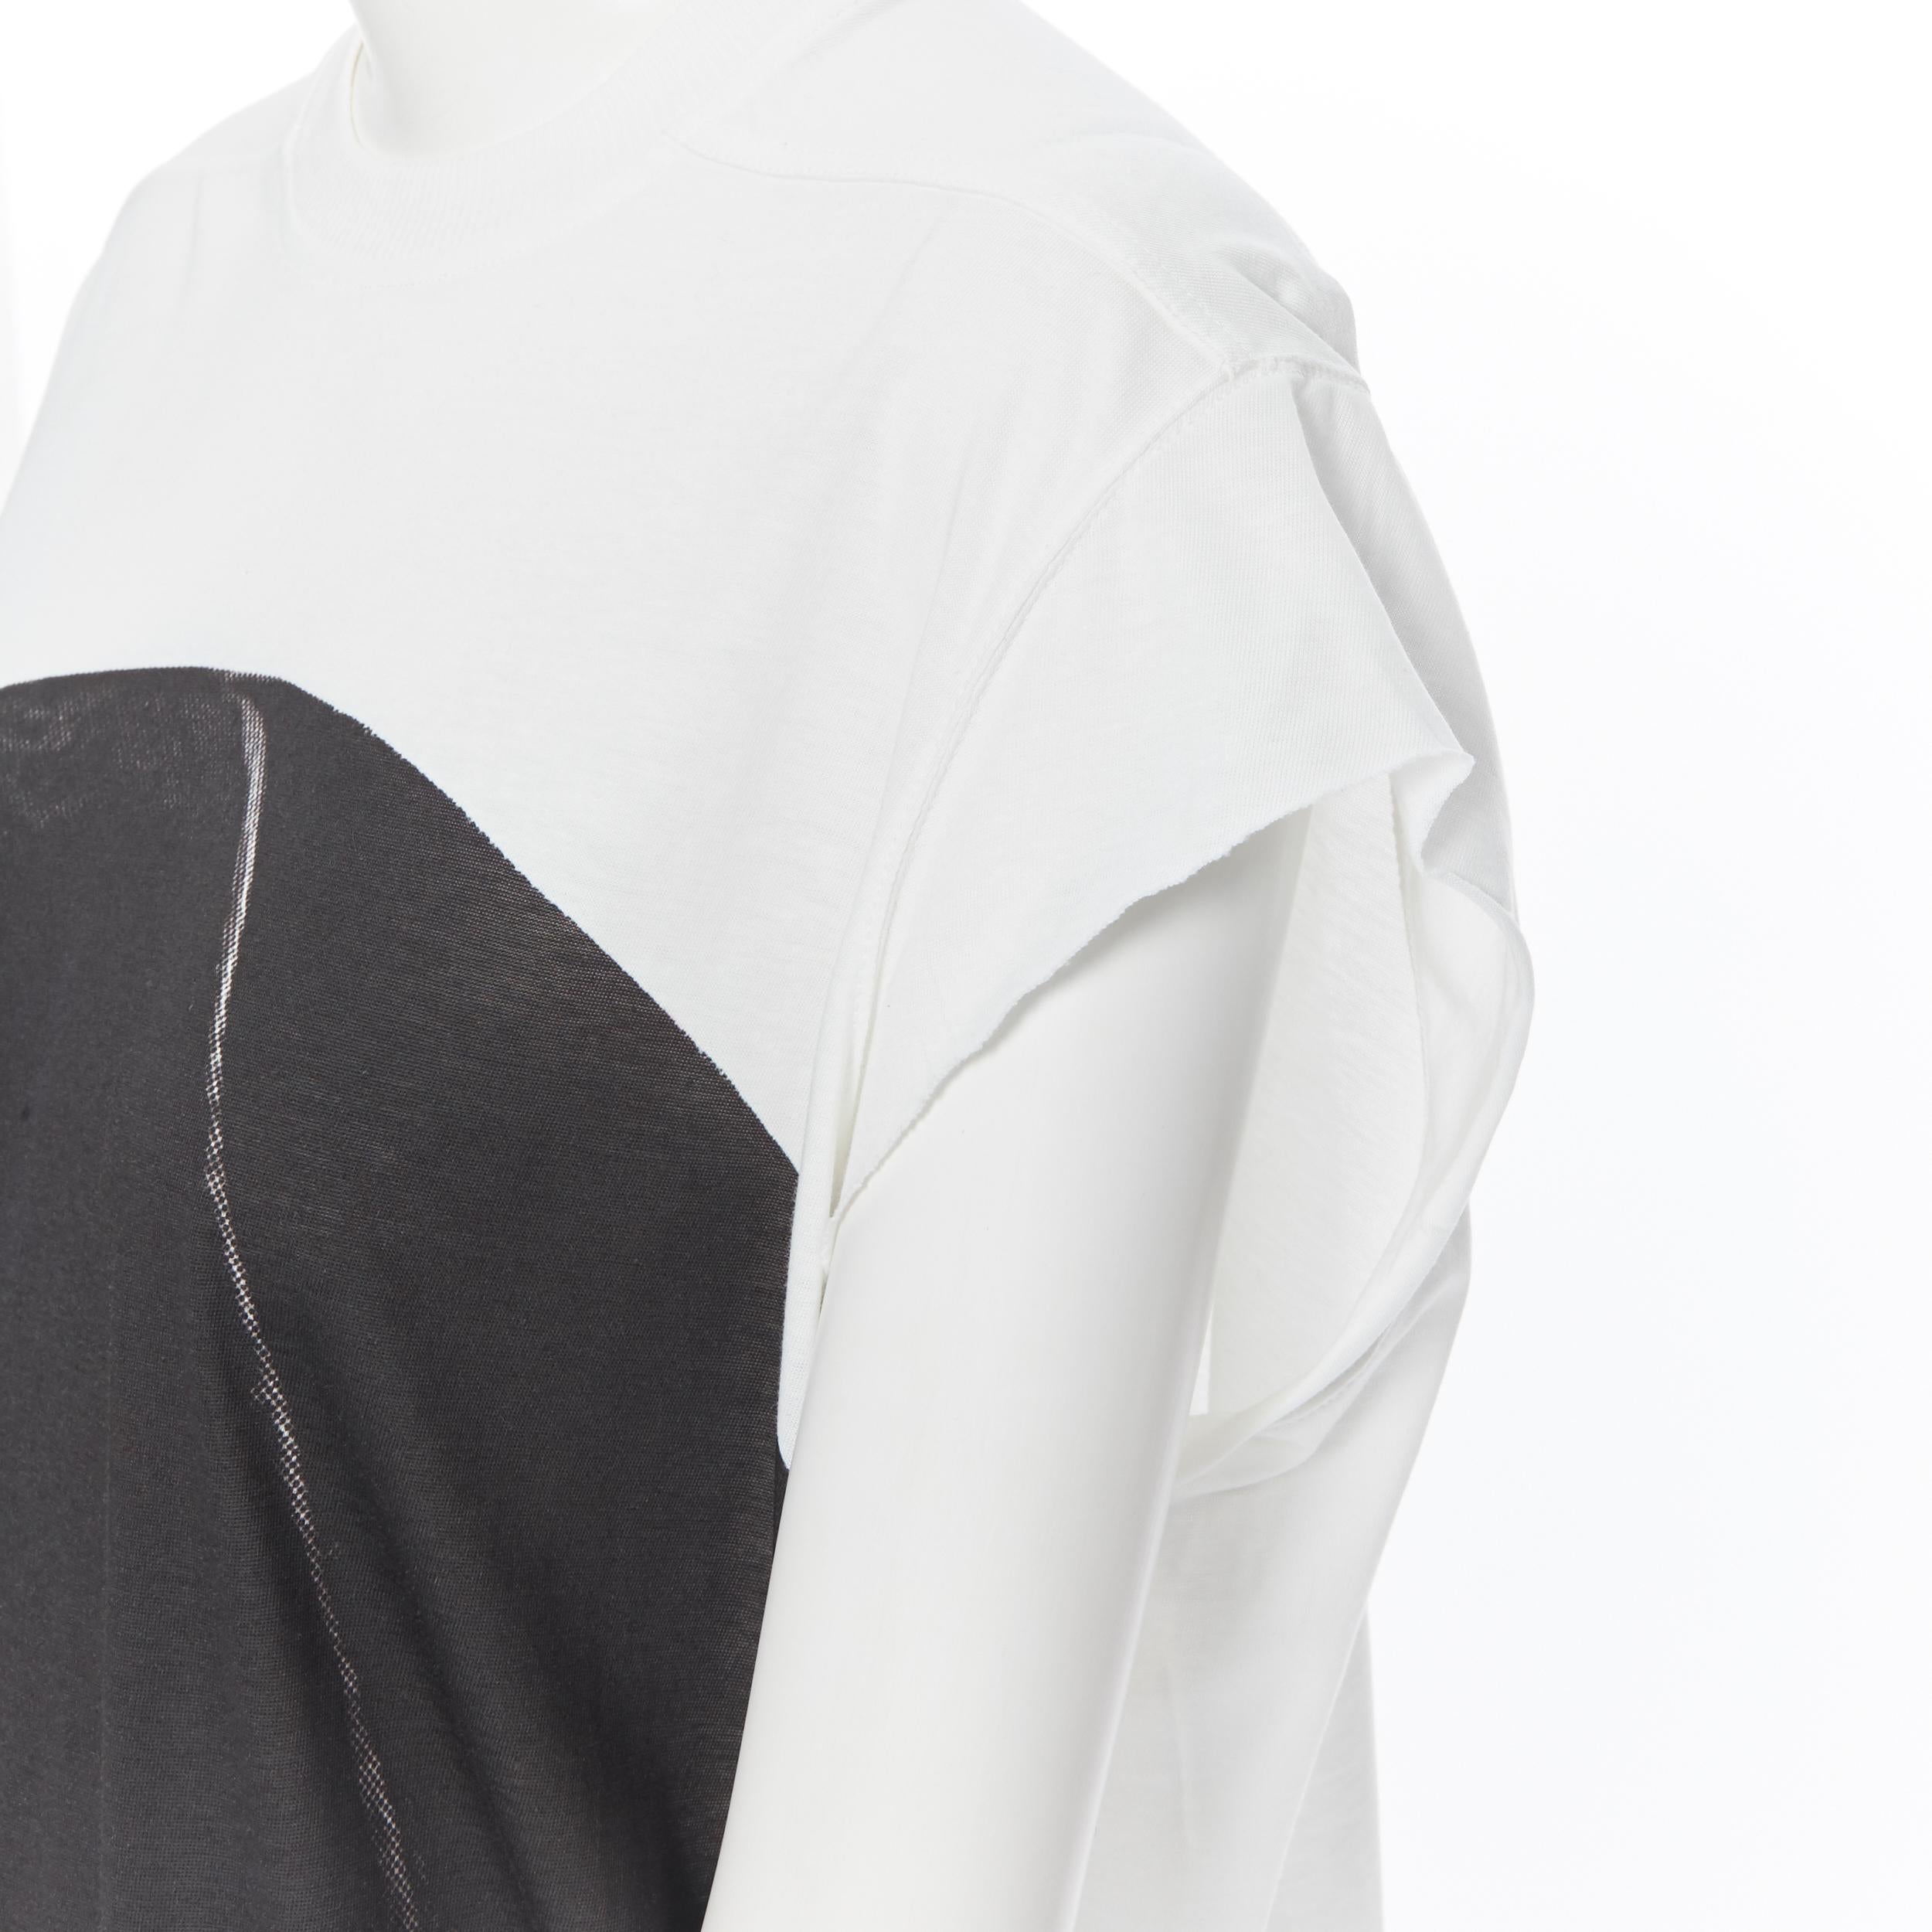 new RICK OWENS DRKSHDW SS18 Dirt Jumbo white black photo print t-shirt dress OS
Brand: Rick Owens
Designer: Rick Owens
Collection: Spring Summer 2018
Model Name / Style: Jumbo Dress
Material: Cotton
Color: White; black print
Pattern: Abstract